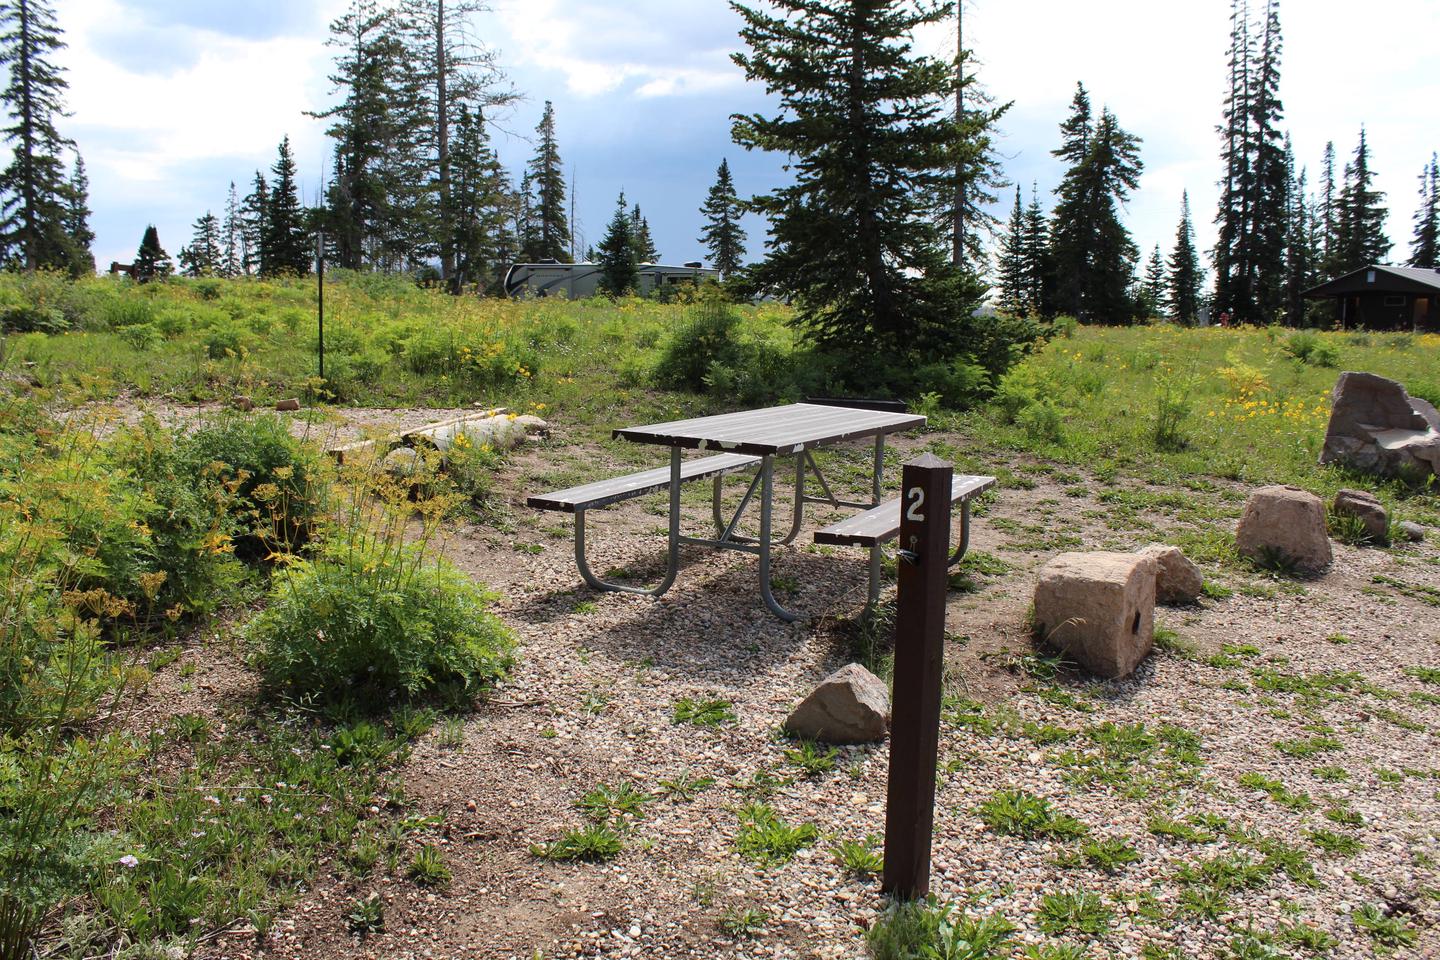 Site 2: View of tent pad, table and parking area.